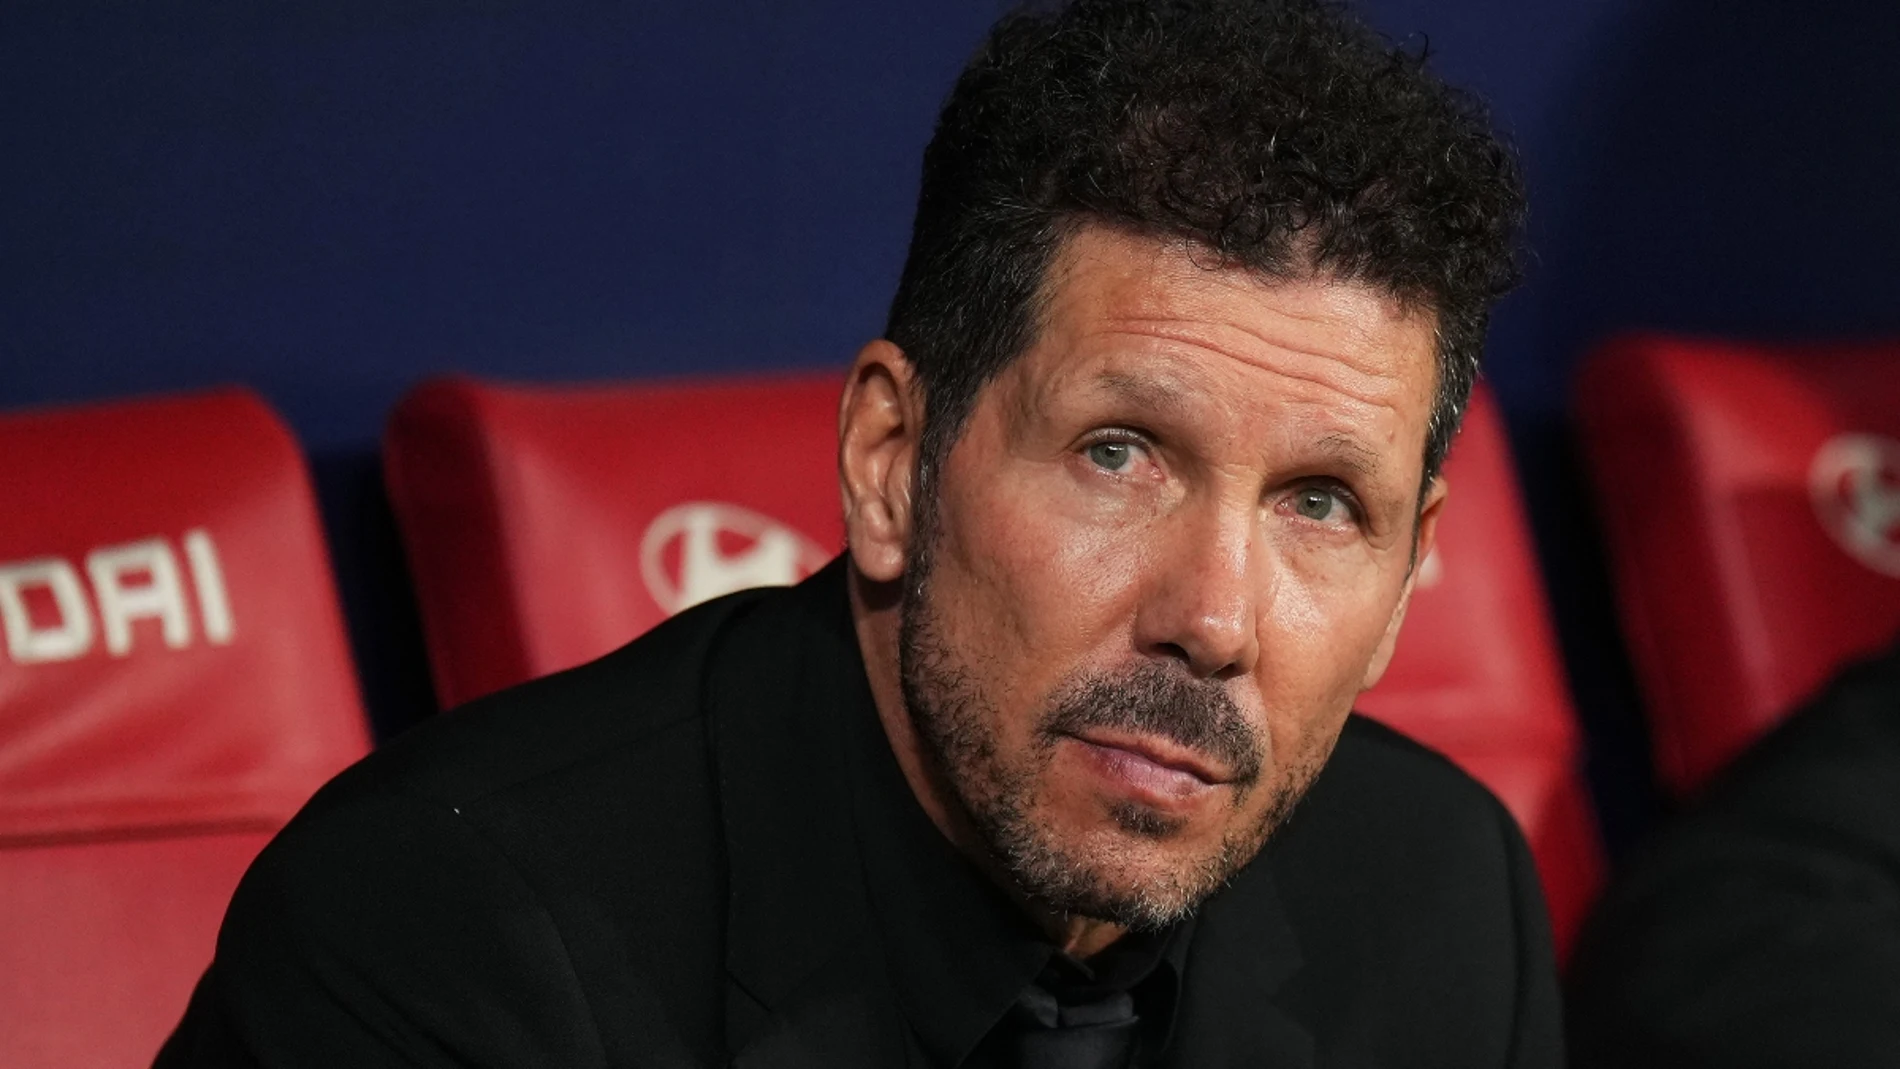 The Chiringuito sharpens Simeone's message to Joao Félix: ground-to-air missile
	
